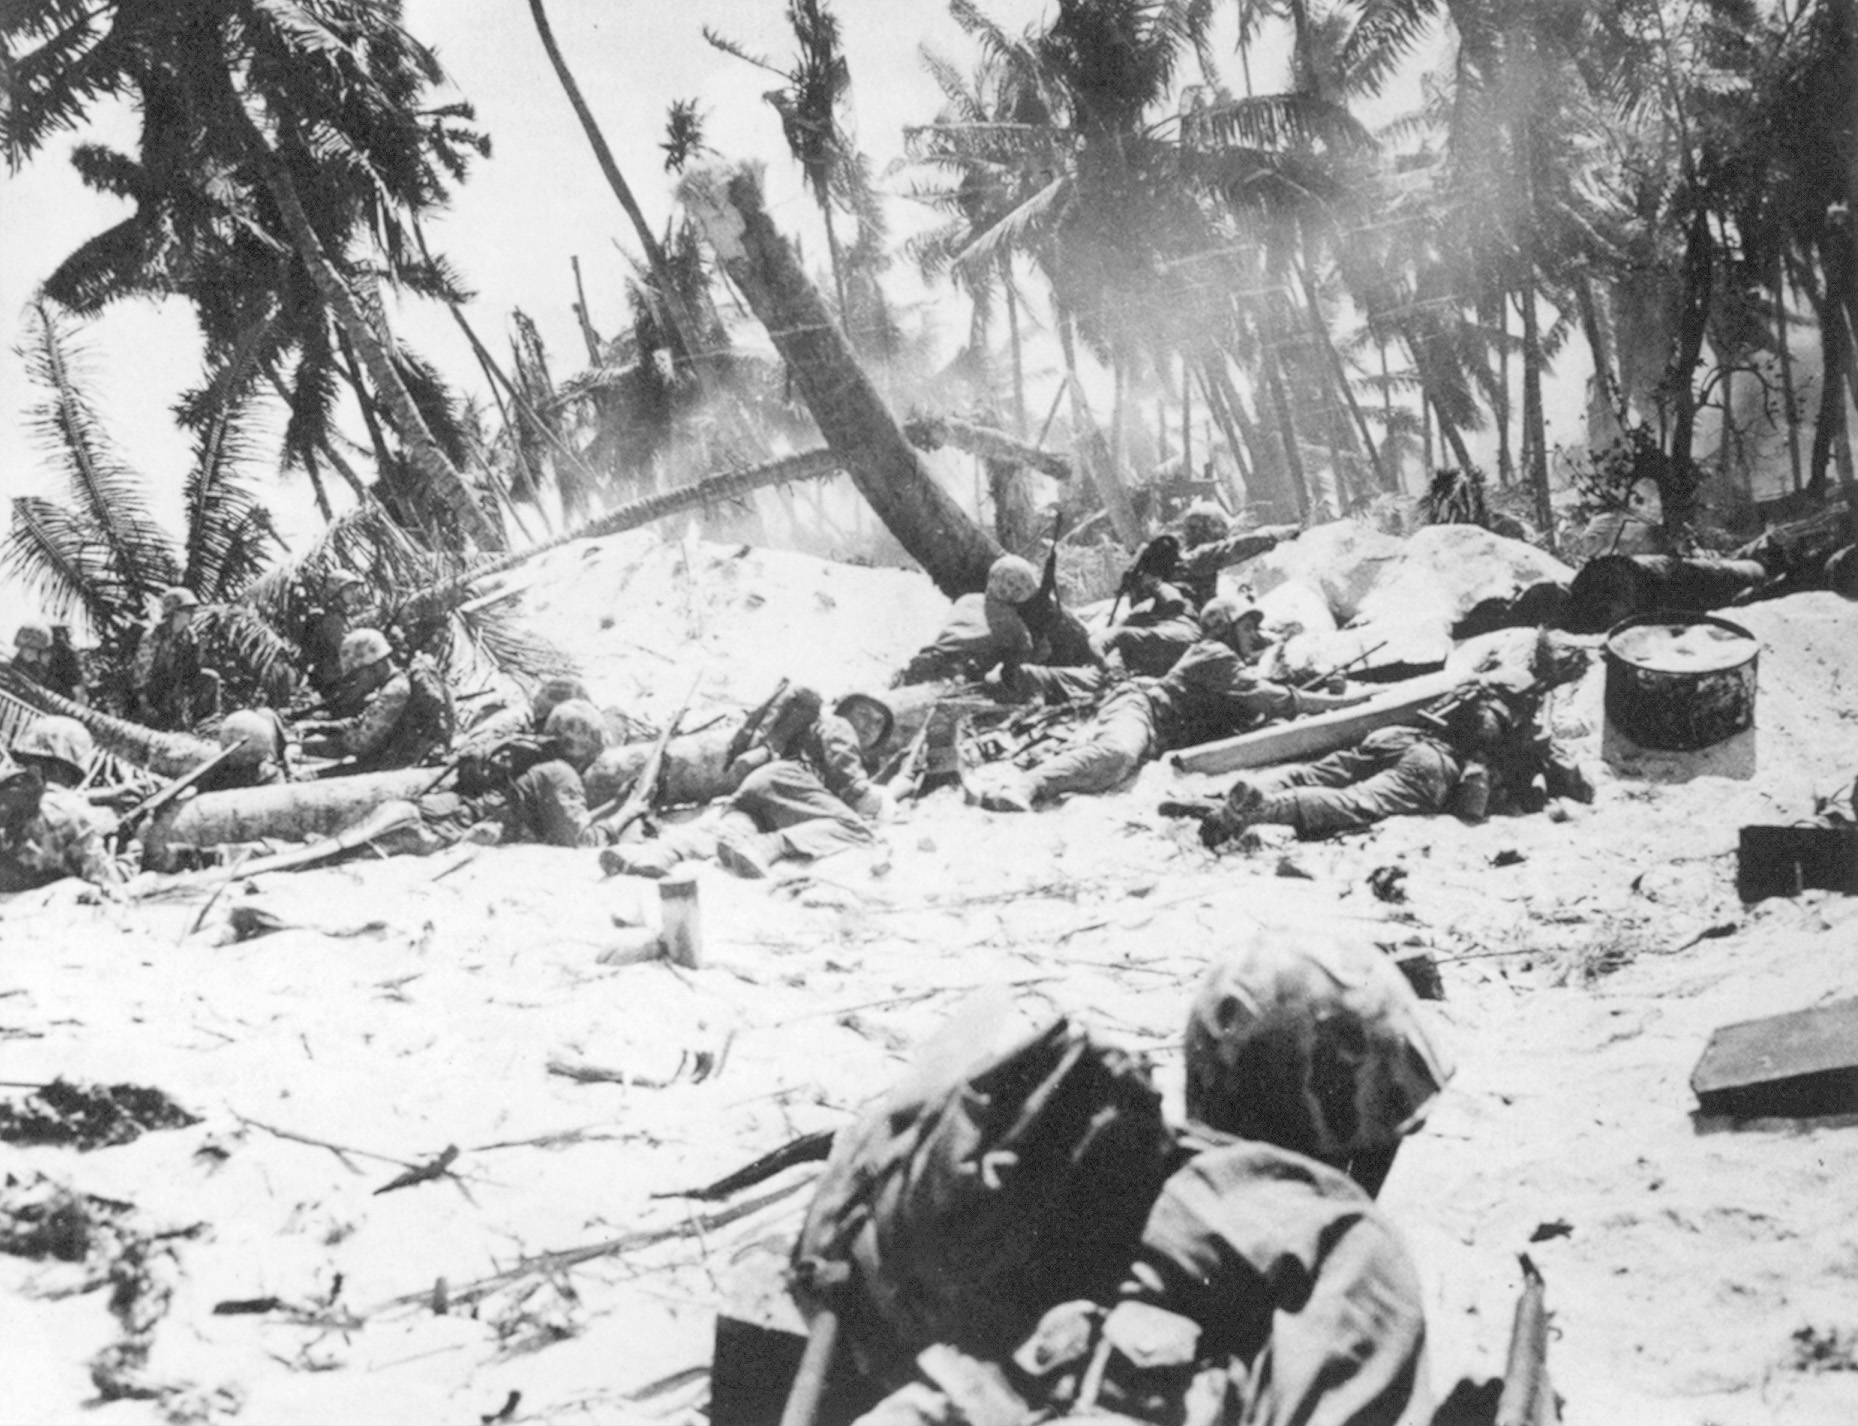 Pinned down by Japanese fire, a group of Marines assesses its situation. Individual acts of heroism often led the way, but few significant advances were made on the day of the initial assault.